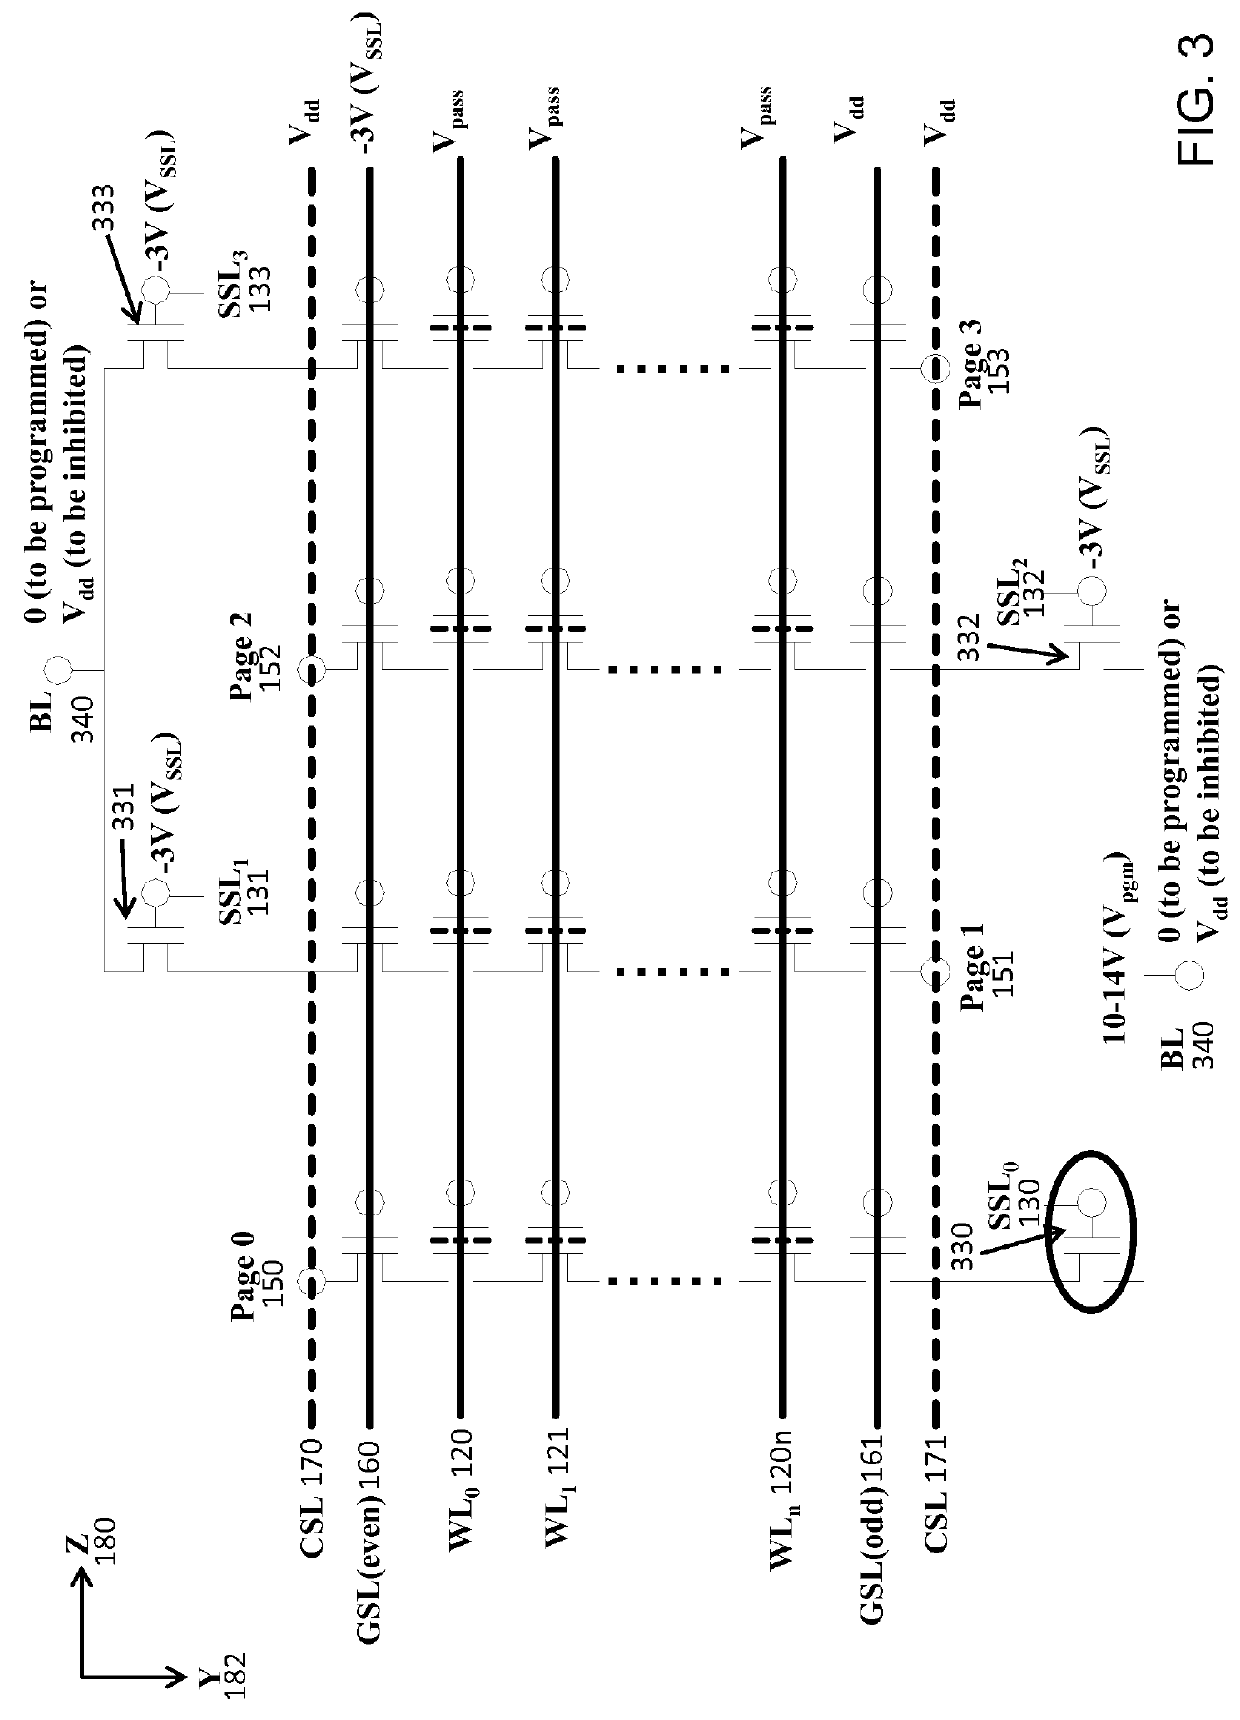 Systems and methods for trimming control transistors for 3D NAND flash